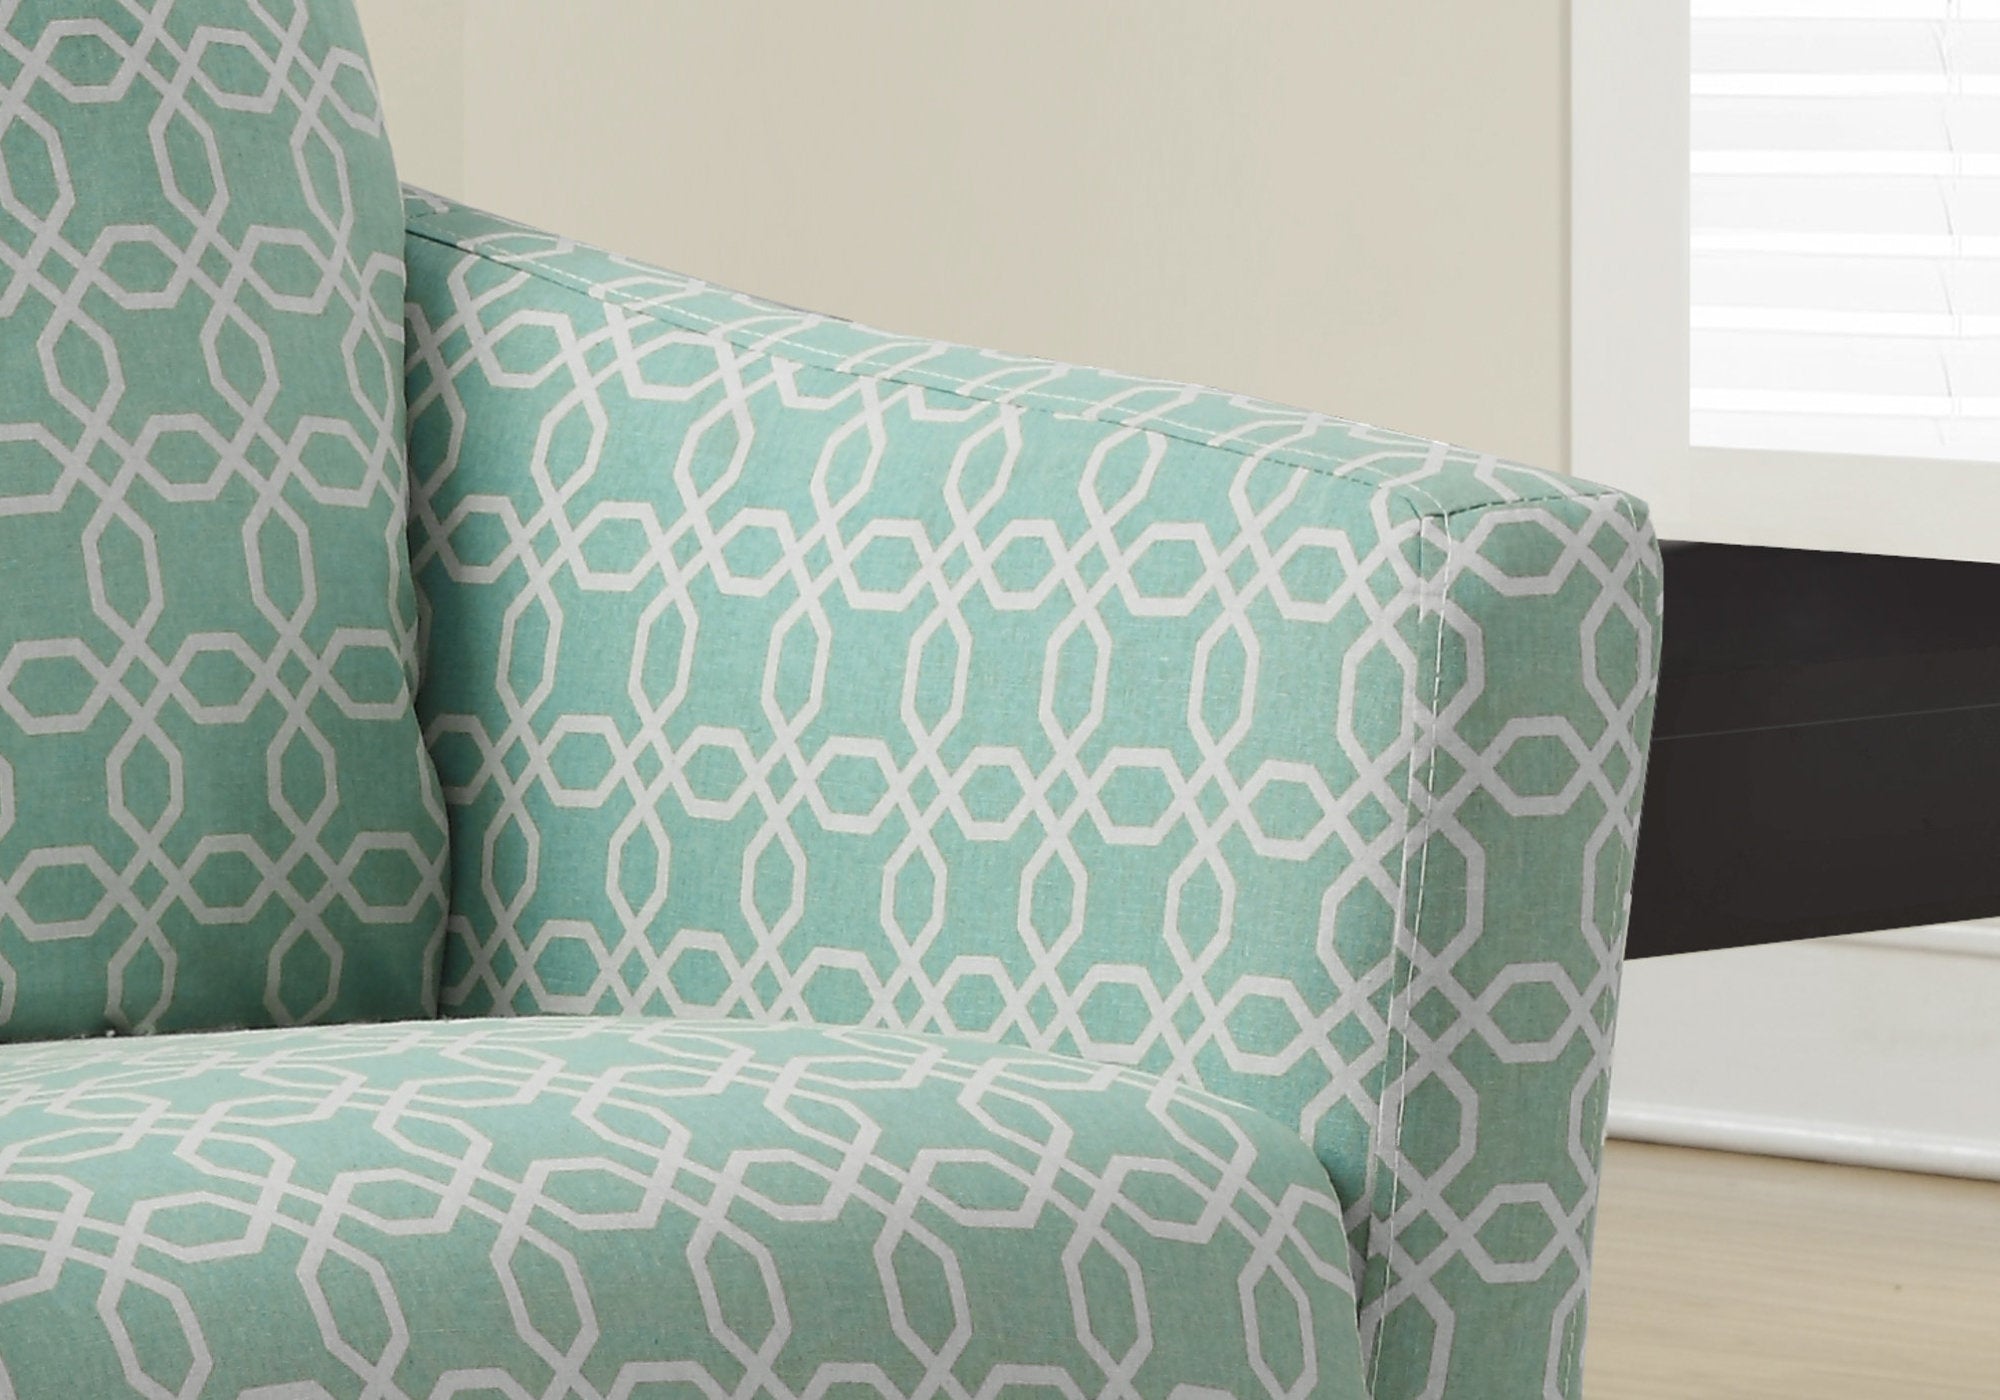 Accent Chair - Faded Green  Angled Kaleidoscope  Fabric